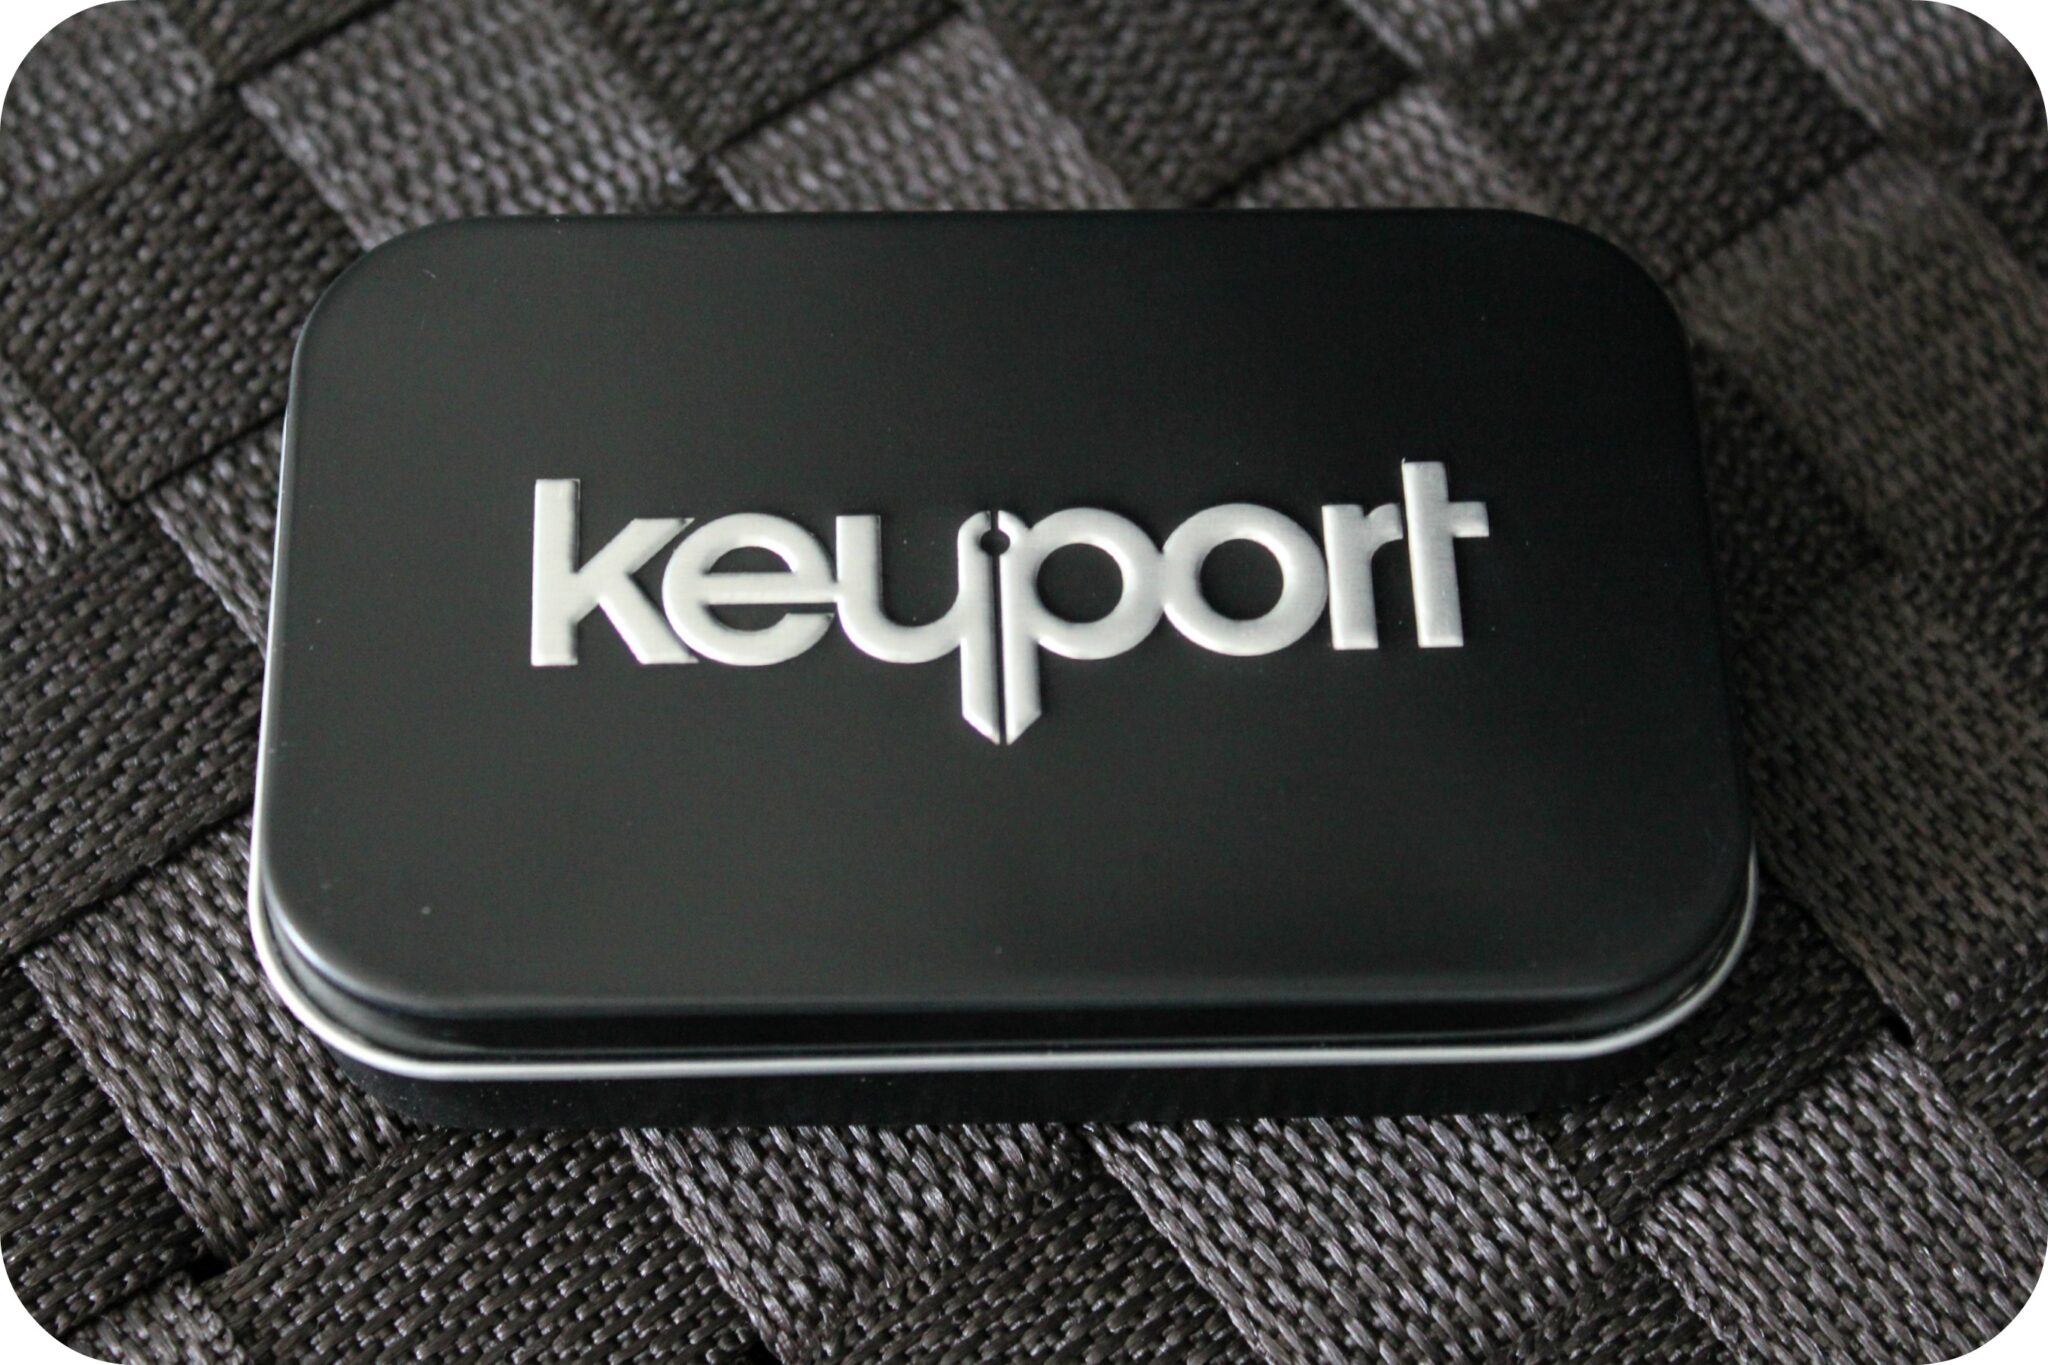 Keyport: An Innovative Keyring Alternative That You and Hubby Will Love!